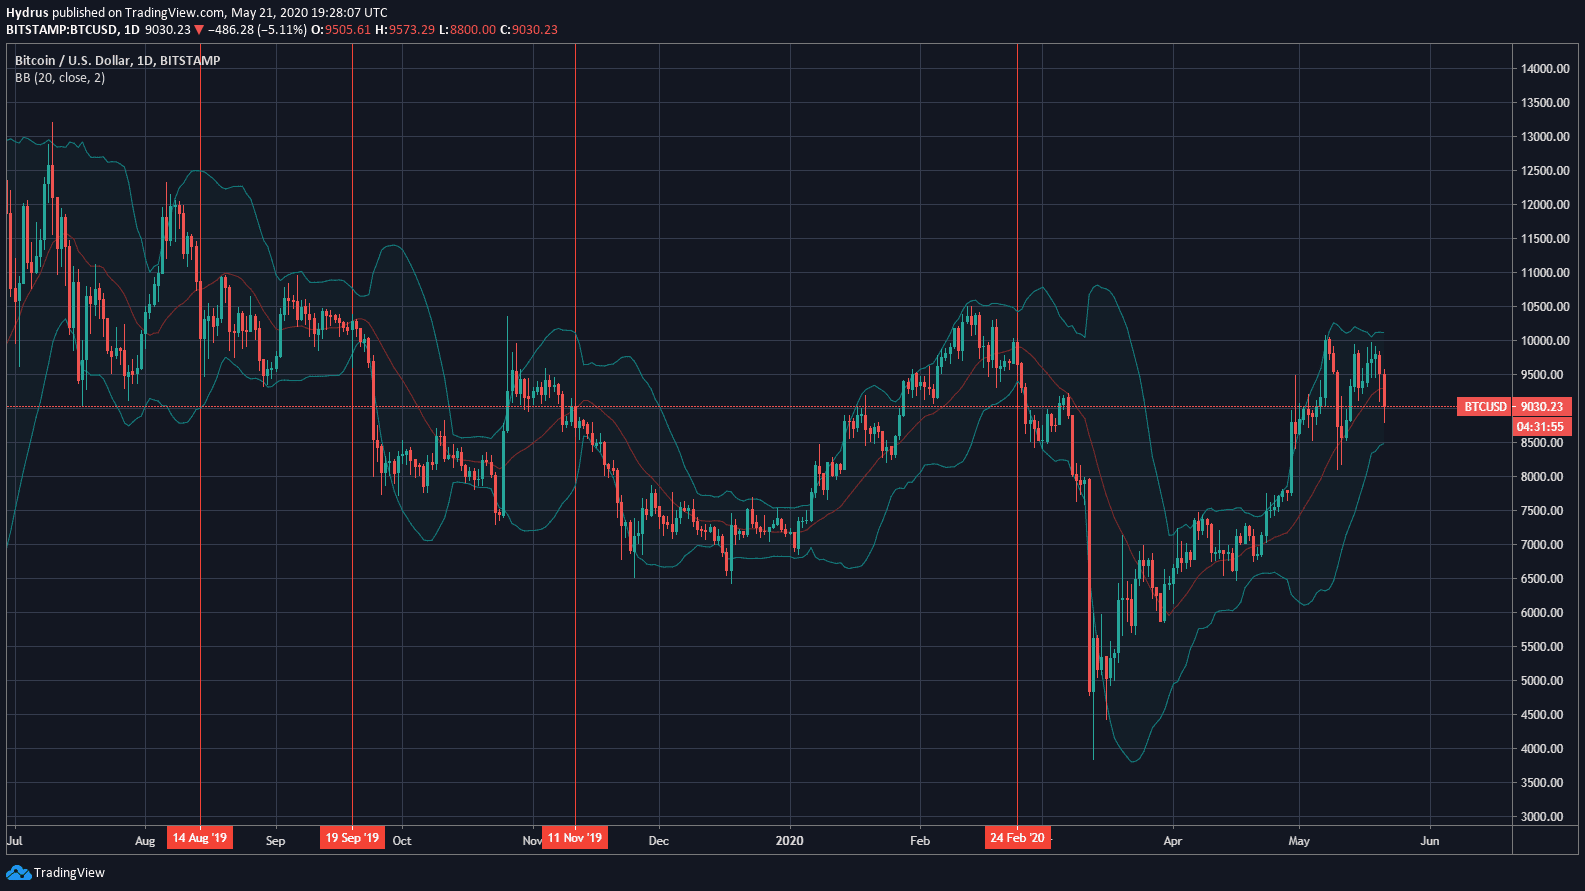 BTC price chart from TradingView.com. The red vertical lines mark occasions when the cryptocurrency fell below the middle Bollinger Band, the 20-day moving average.